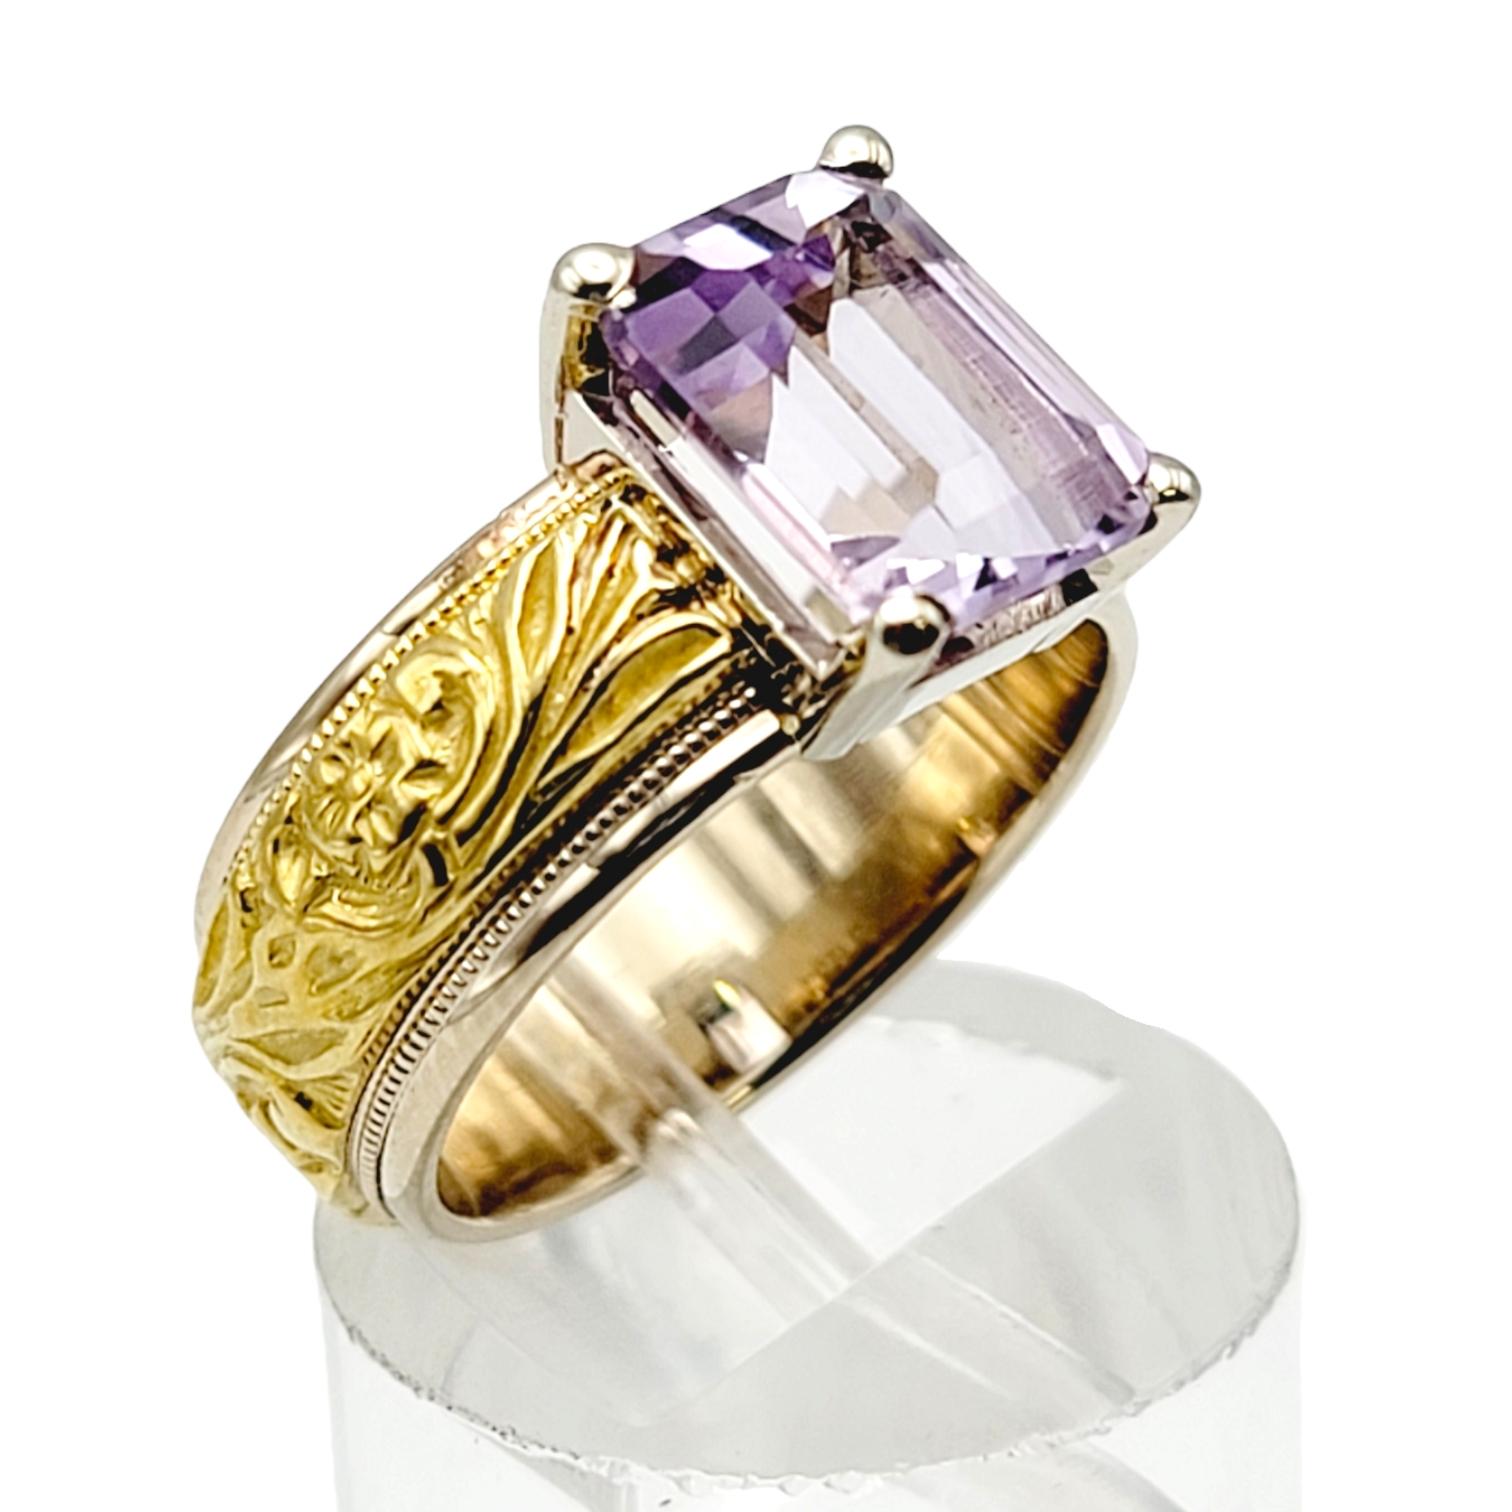 Emerald Cut Amethyst Solitaire Ring with Ornate Engraved Band in 18 Karat Gold For Sale 2